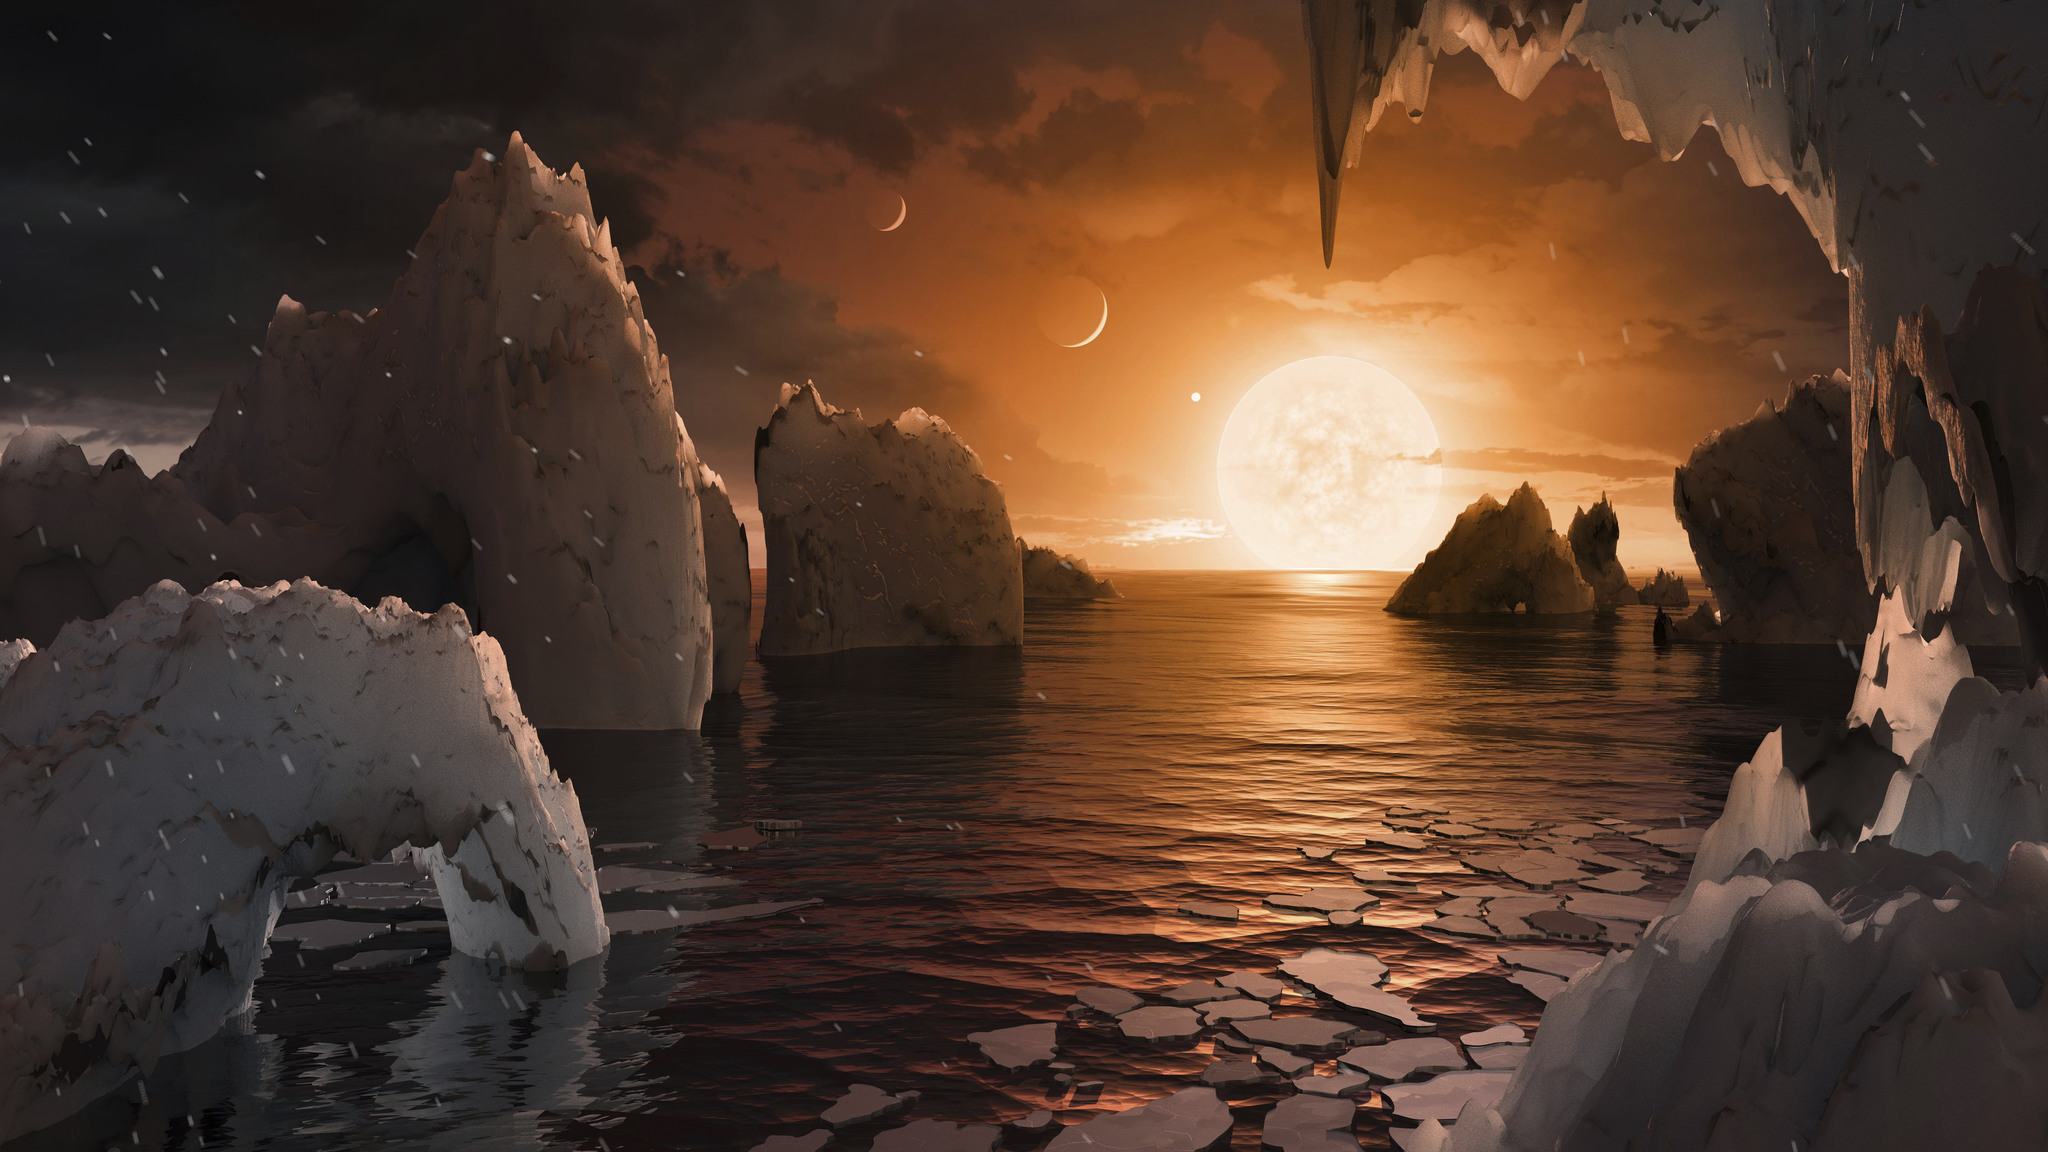 This image provided by NASA/JPL-Caltech shows an artist’s conception of what the surface of the exoplanet TRAPPIST-1f may look like, based on available data about its diameter, mass and distances from the host star. The planets circle tightly around a dim dwarf star called Trappist-1, barely the size of Jupiter. Three are in the so-called habitable zone, where liquid water and, possibly life, might exist. The others are right on the doorstep. (NASA/JPL-Caltech via the Associated Press)